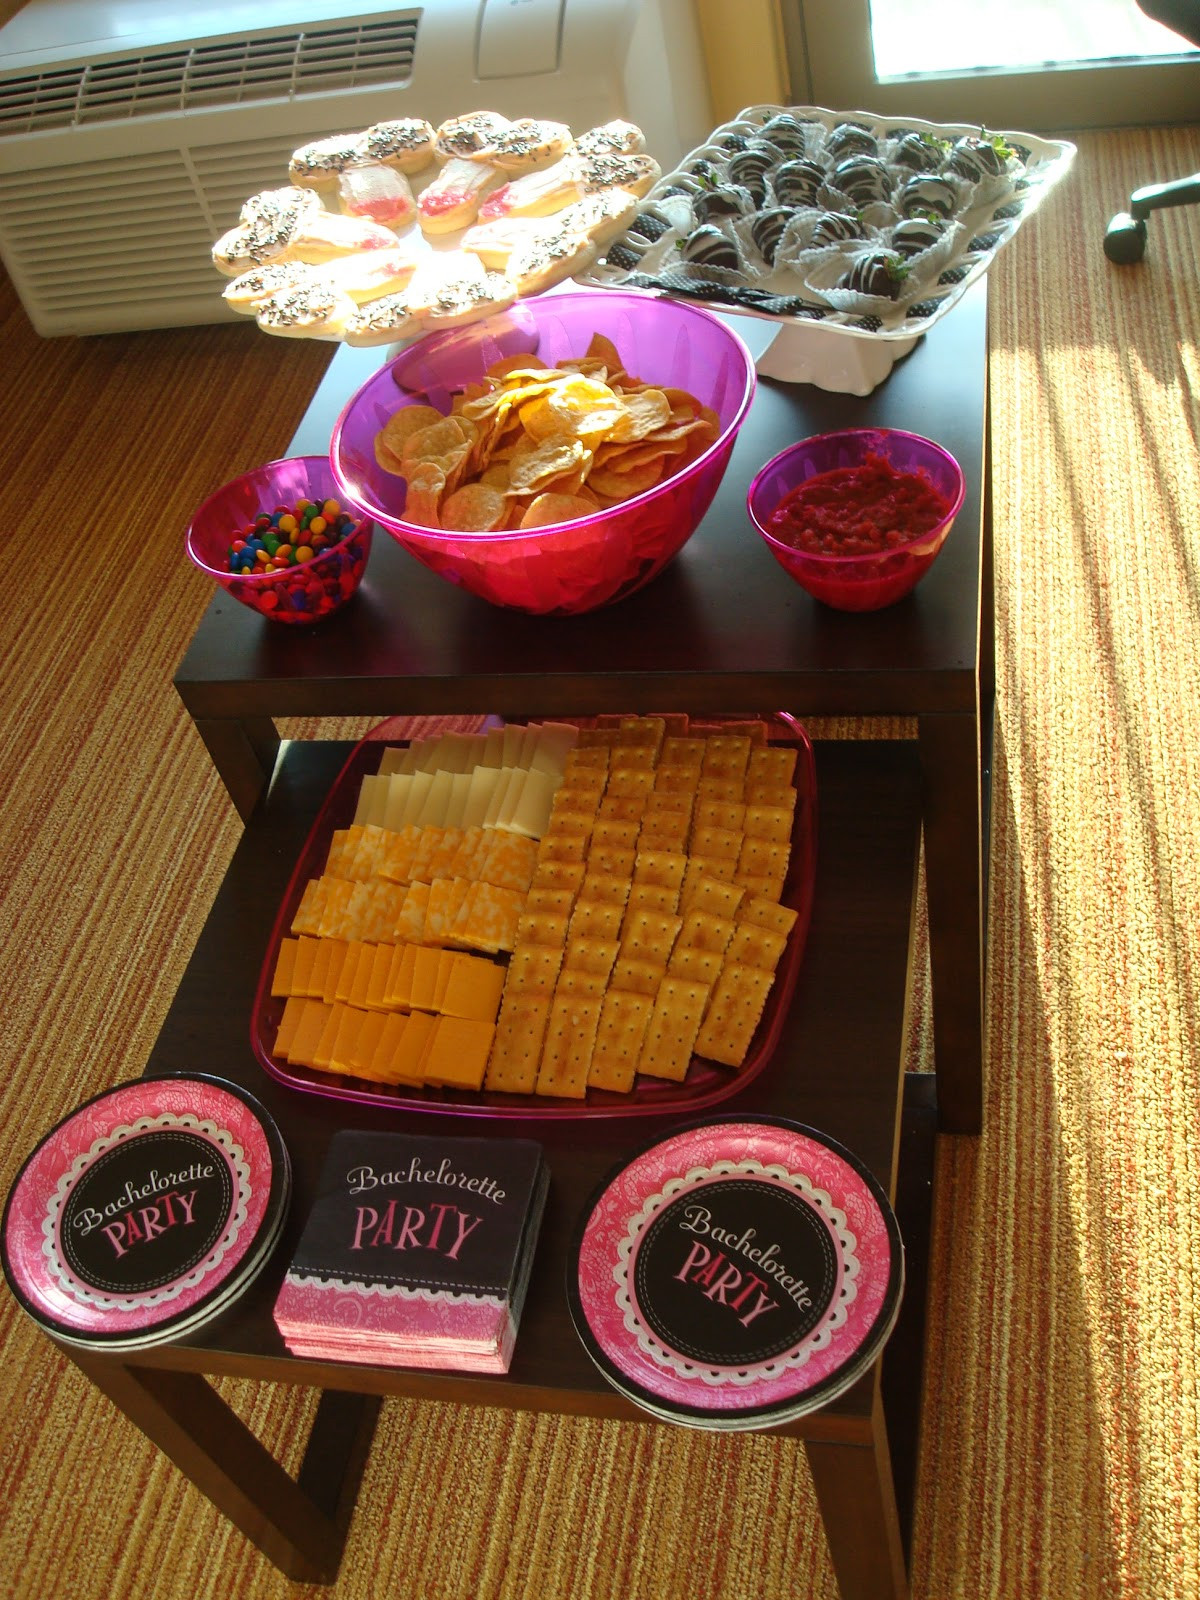 Bachelorette Party Snack Ideas
 The Journey To "We" A Low Key Bachelorette Party